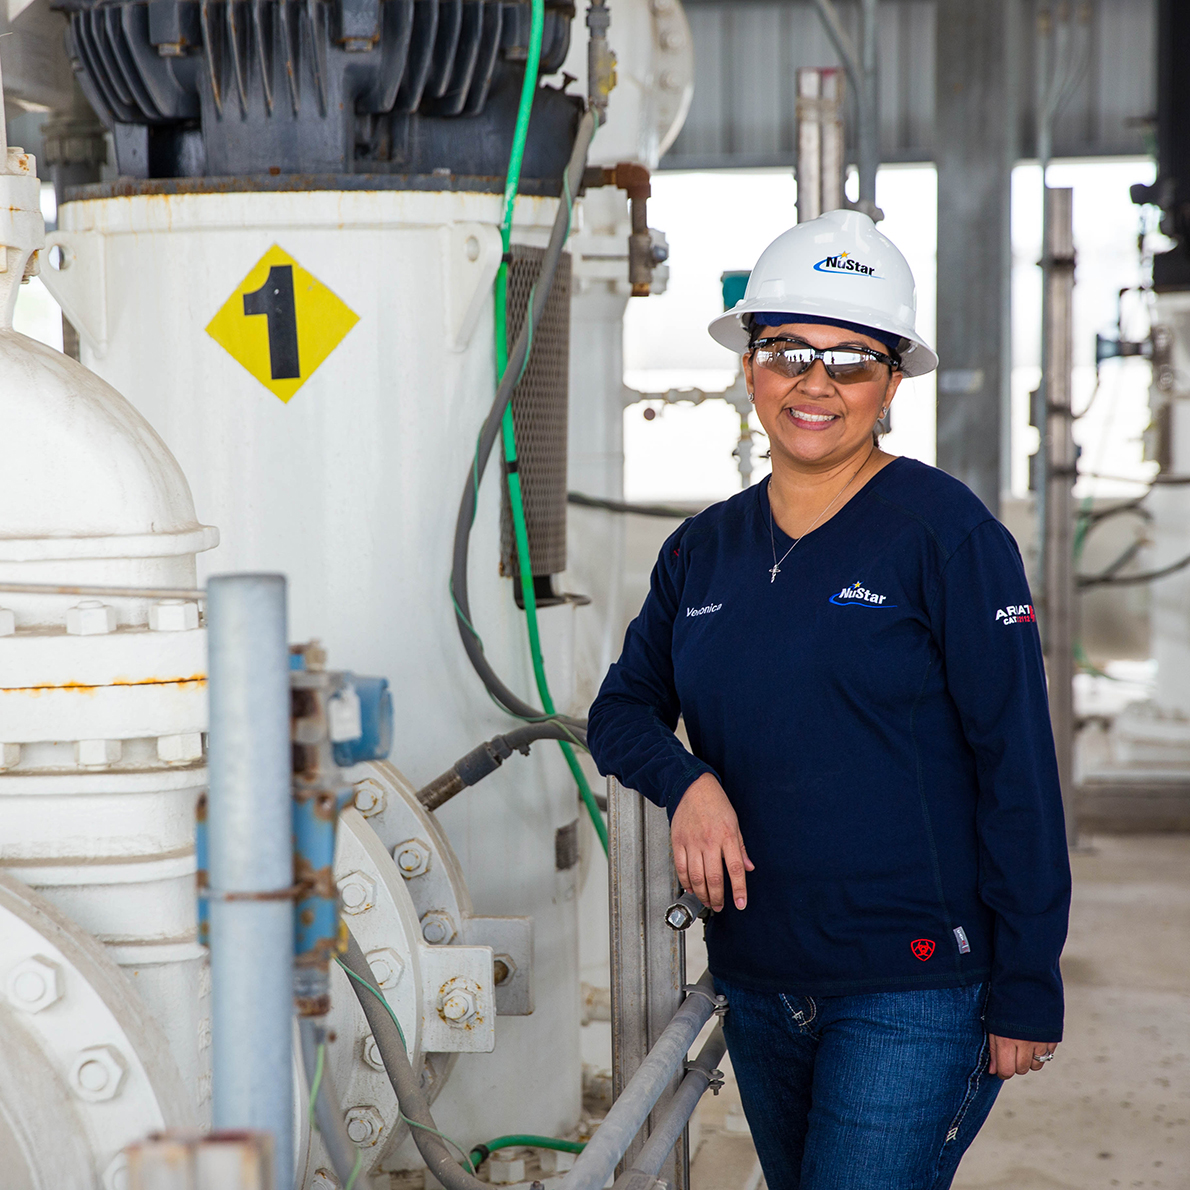 Image of NuStar employee securing a bolt on a vessel at a NuStar plant.